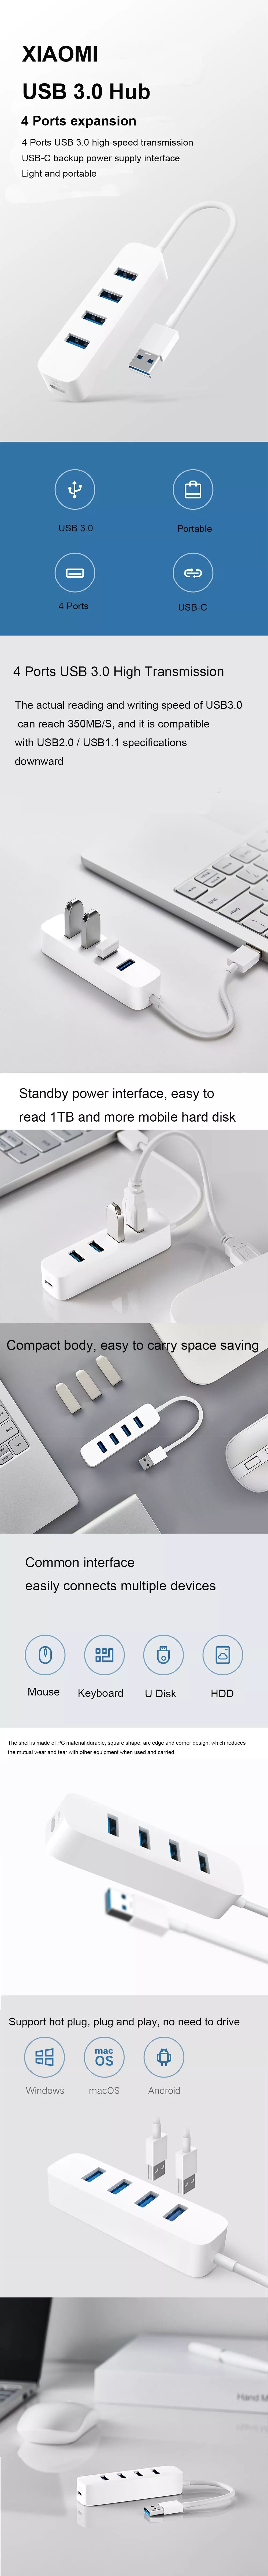 Xiaomi-4-Ports-USB30-Hub-with-Stand-by-Power-Supply-Interface-USB-Hub-Charger-Extender-Extension-Con-1594521